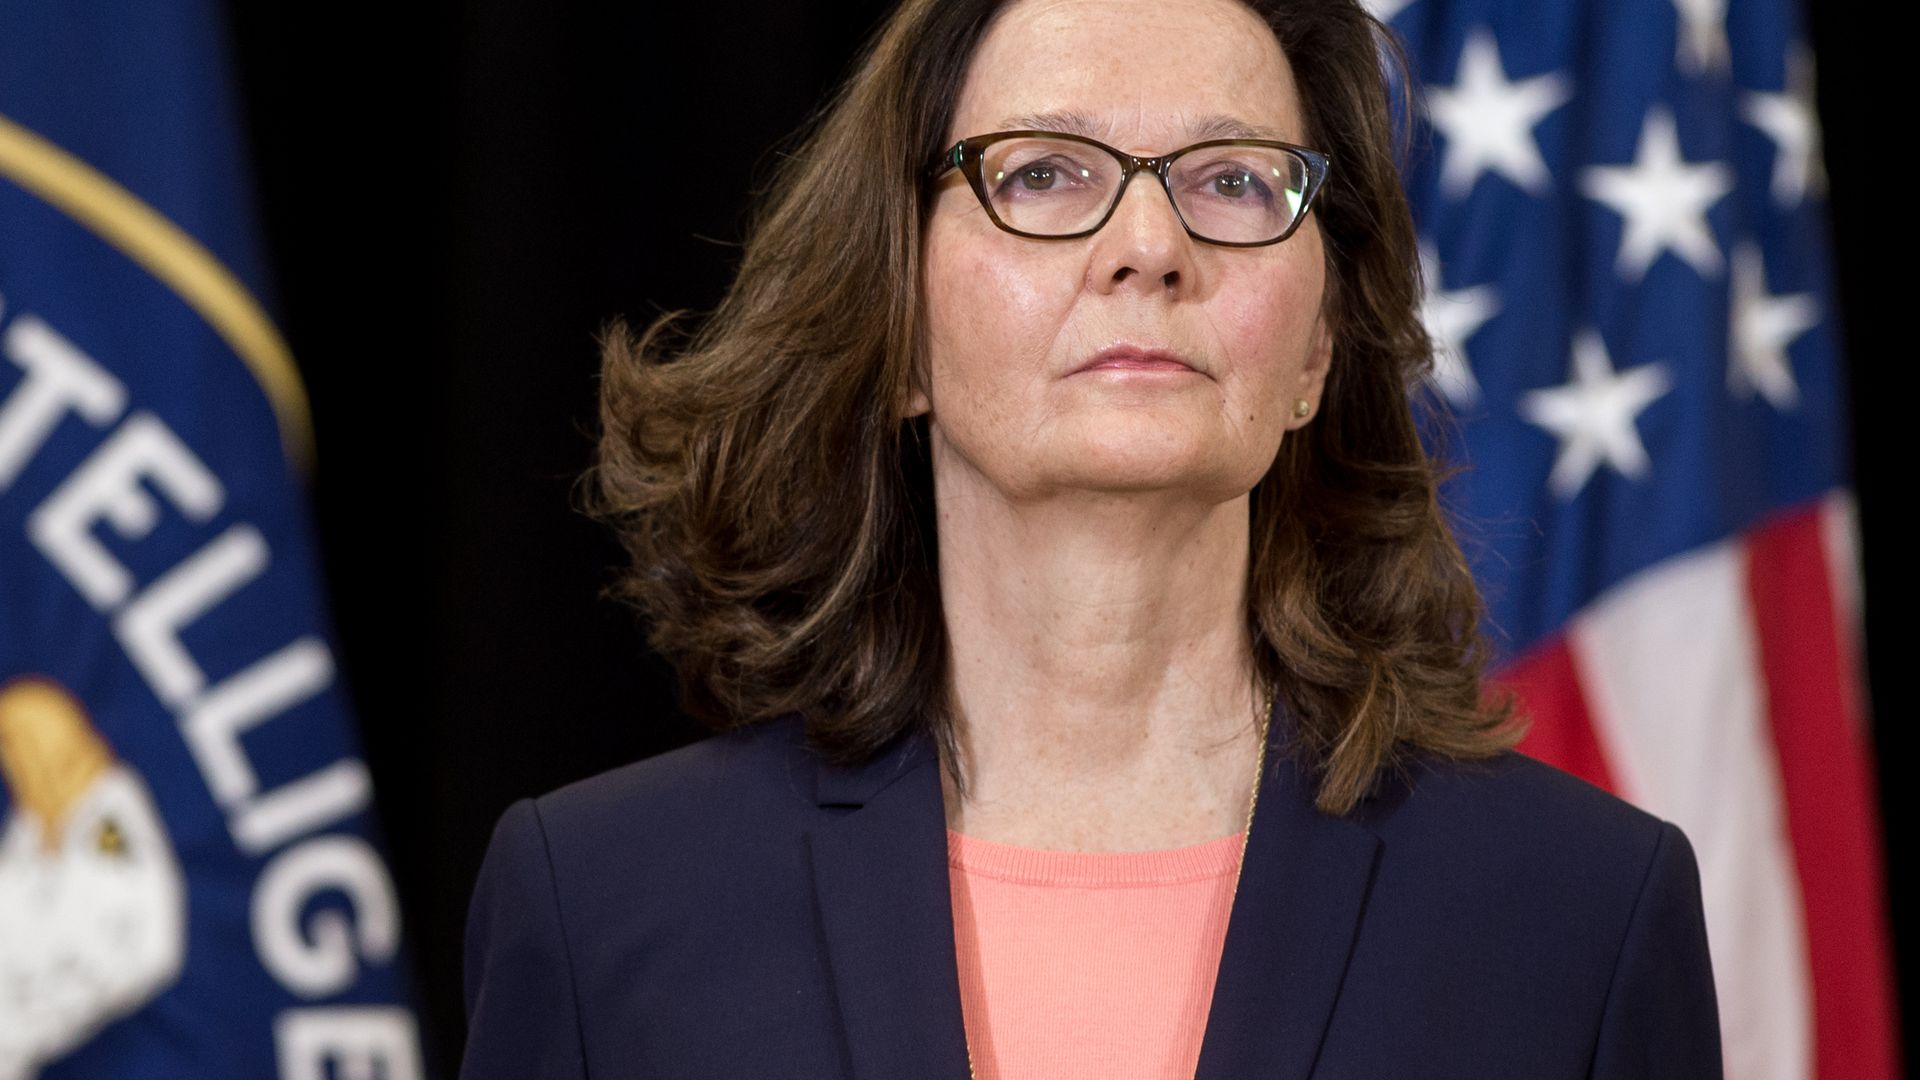 Gina Haspel, Director of the Central Intelligence Agency.